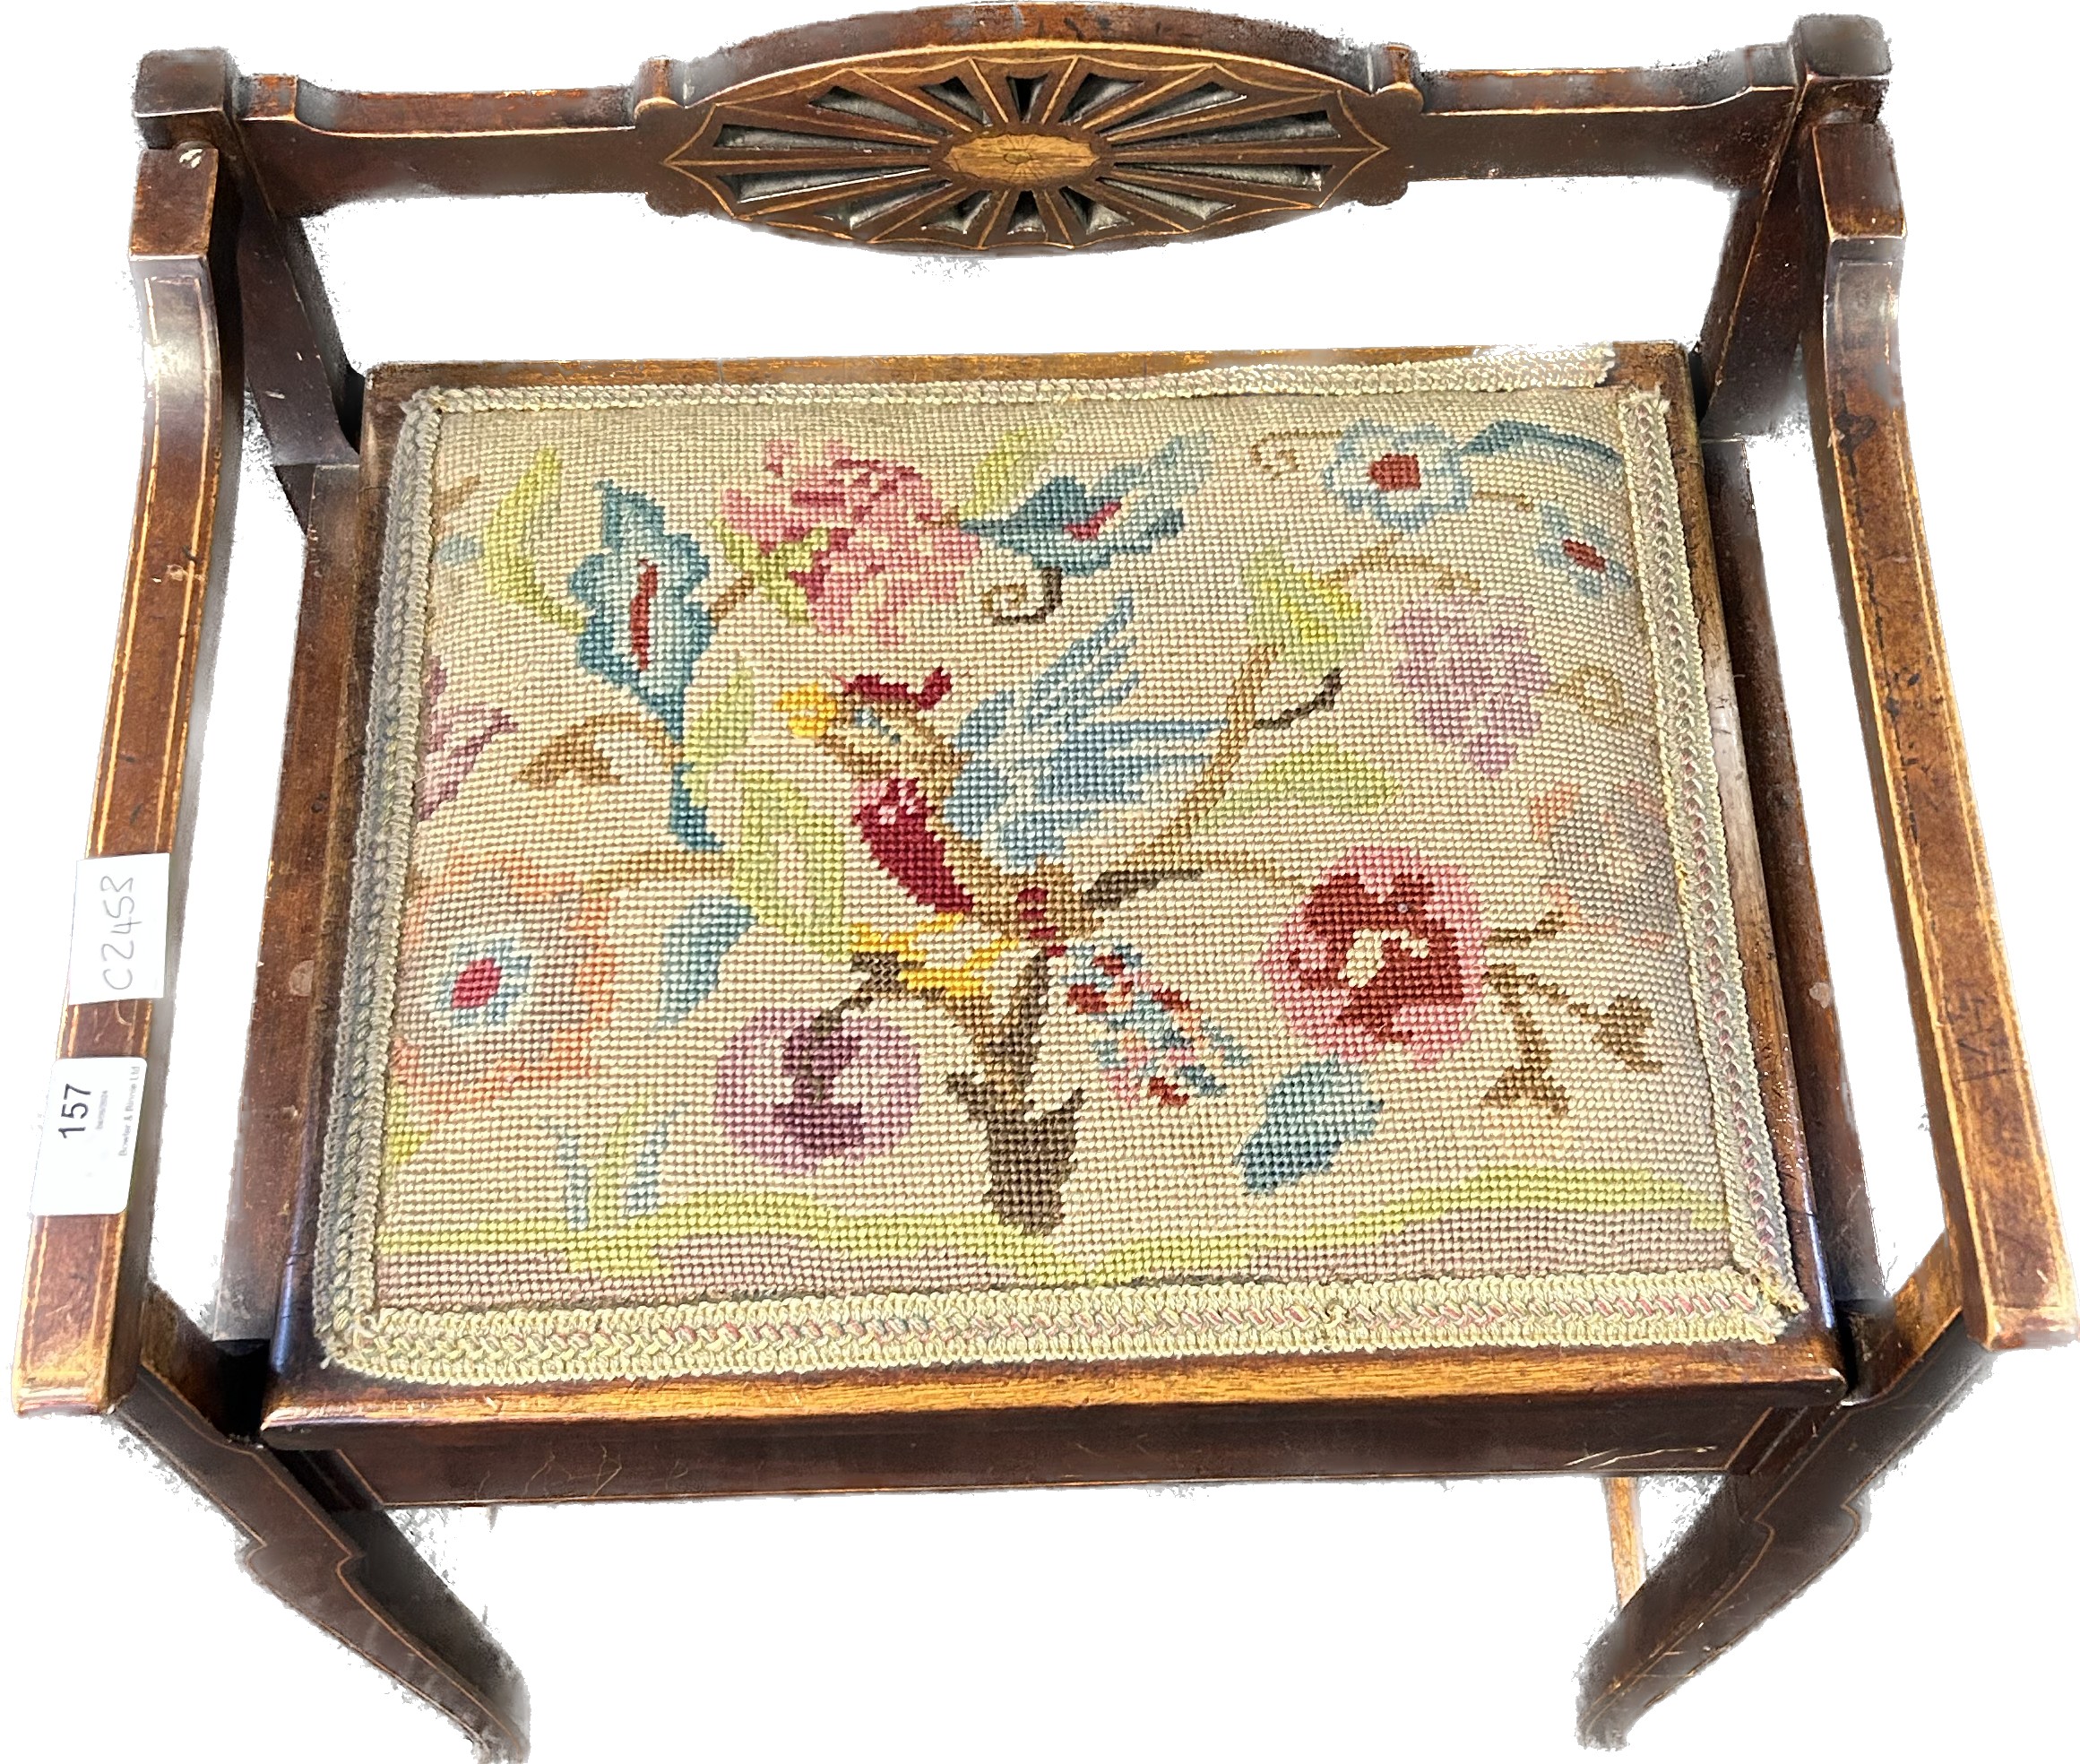 Edwardian piano stool, the back with pierced central splat joining to open arms above a needlework - Image 2 of 4